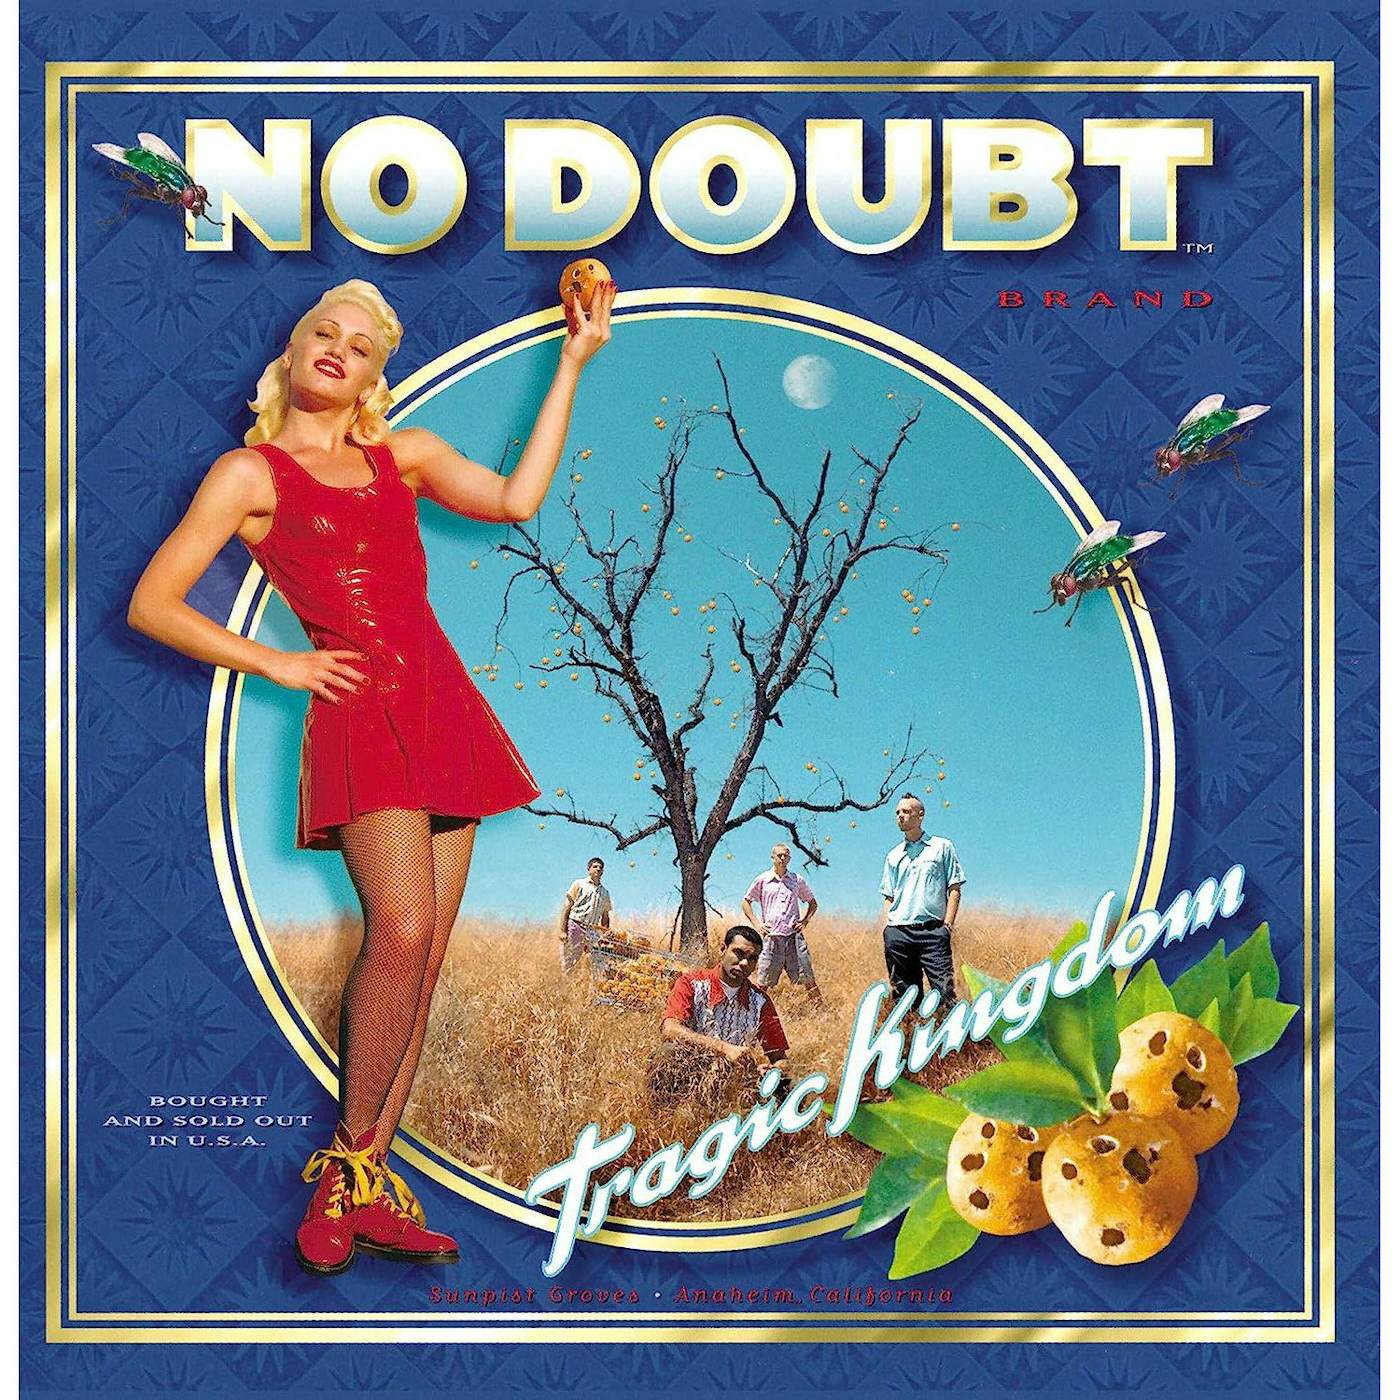 No Doubt - The Beacon Street Collection Limited Edition LP